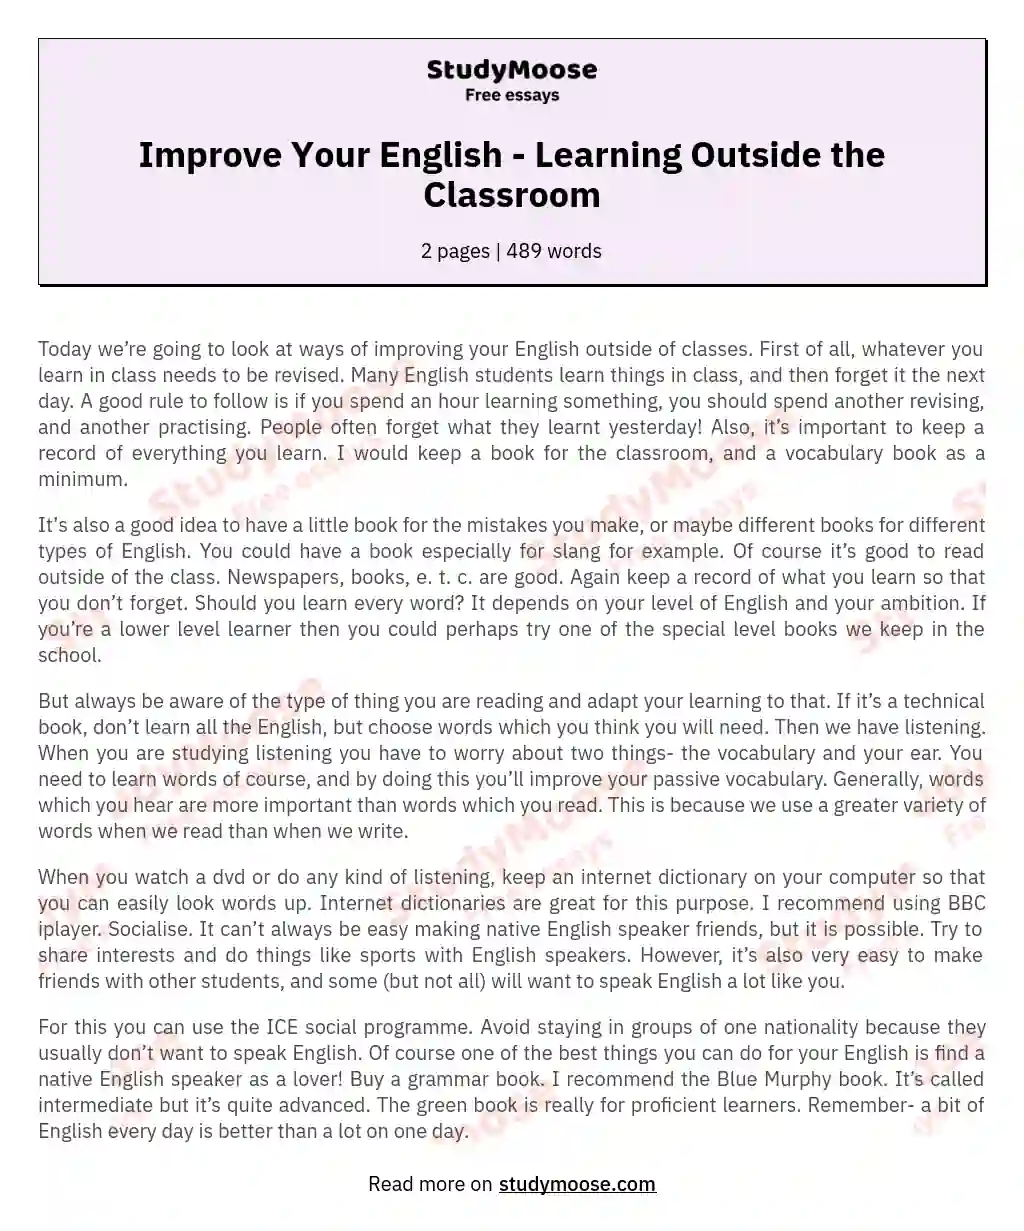 Improve Your English - Learning Outside the Classroom